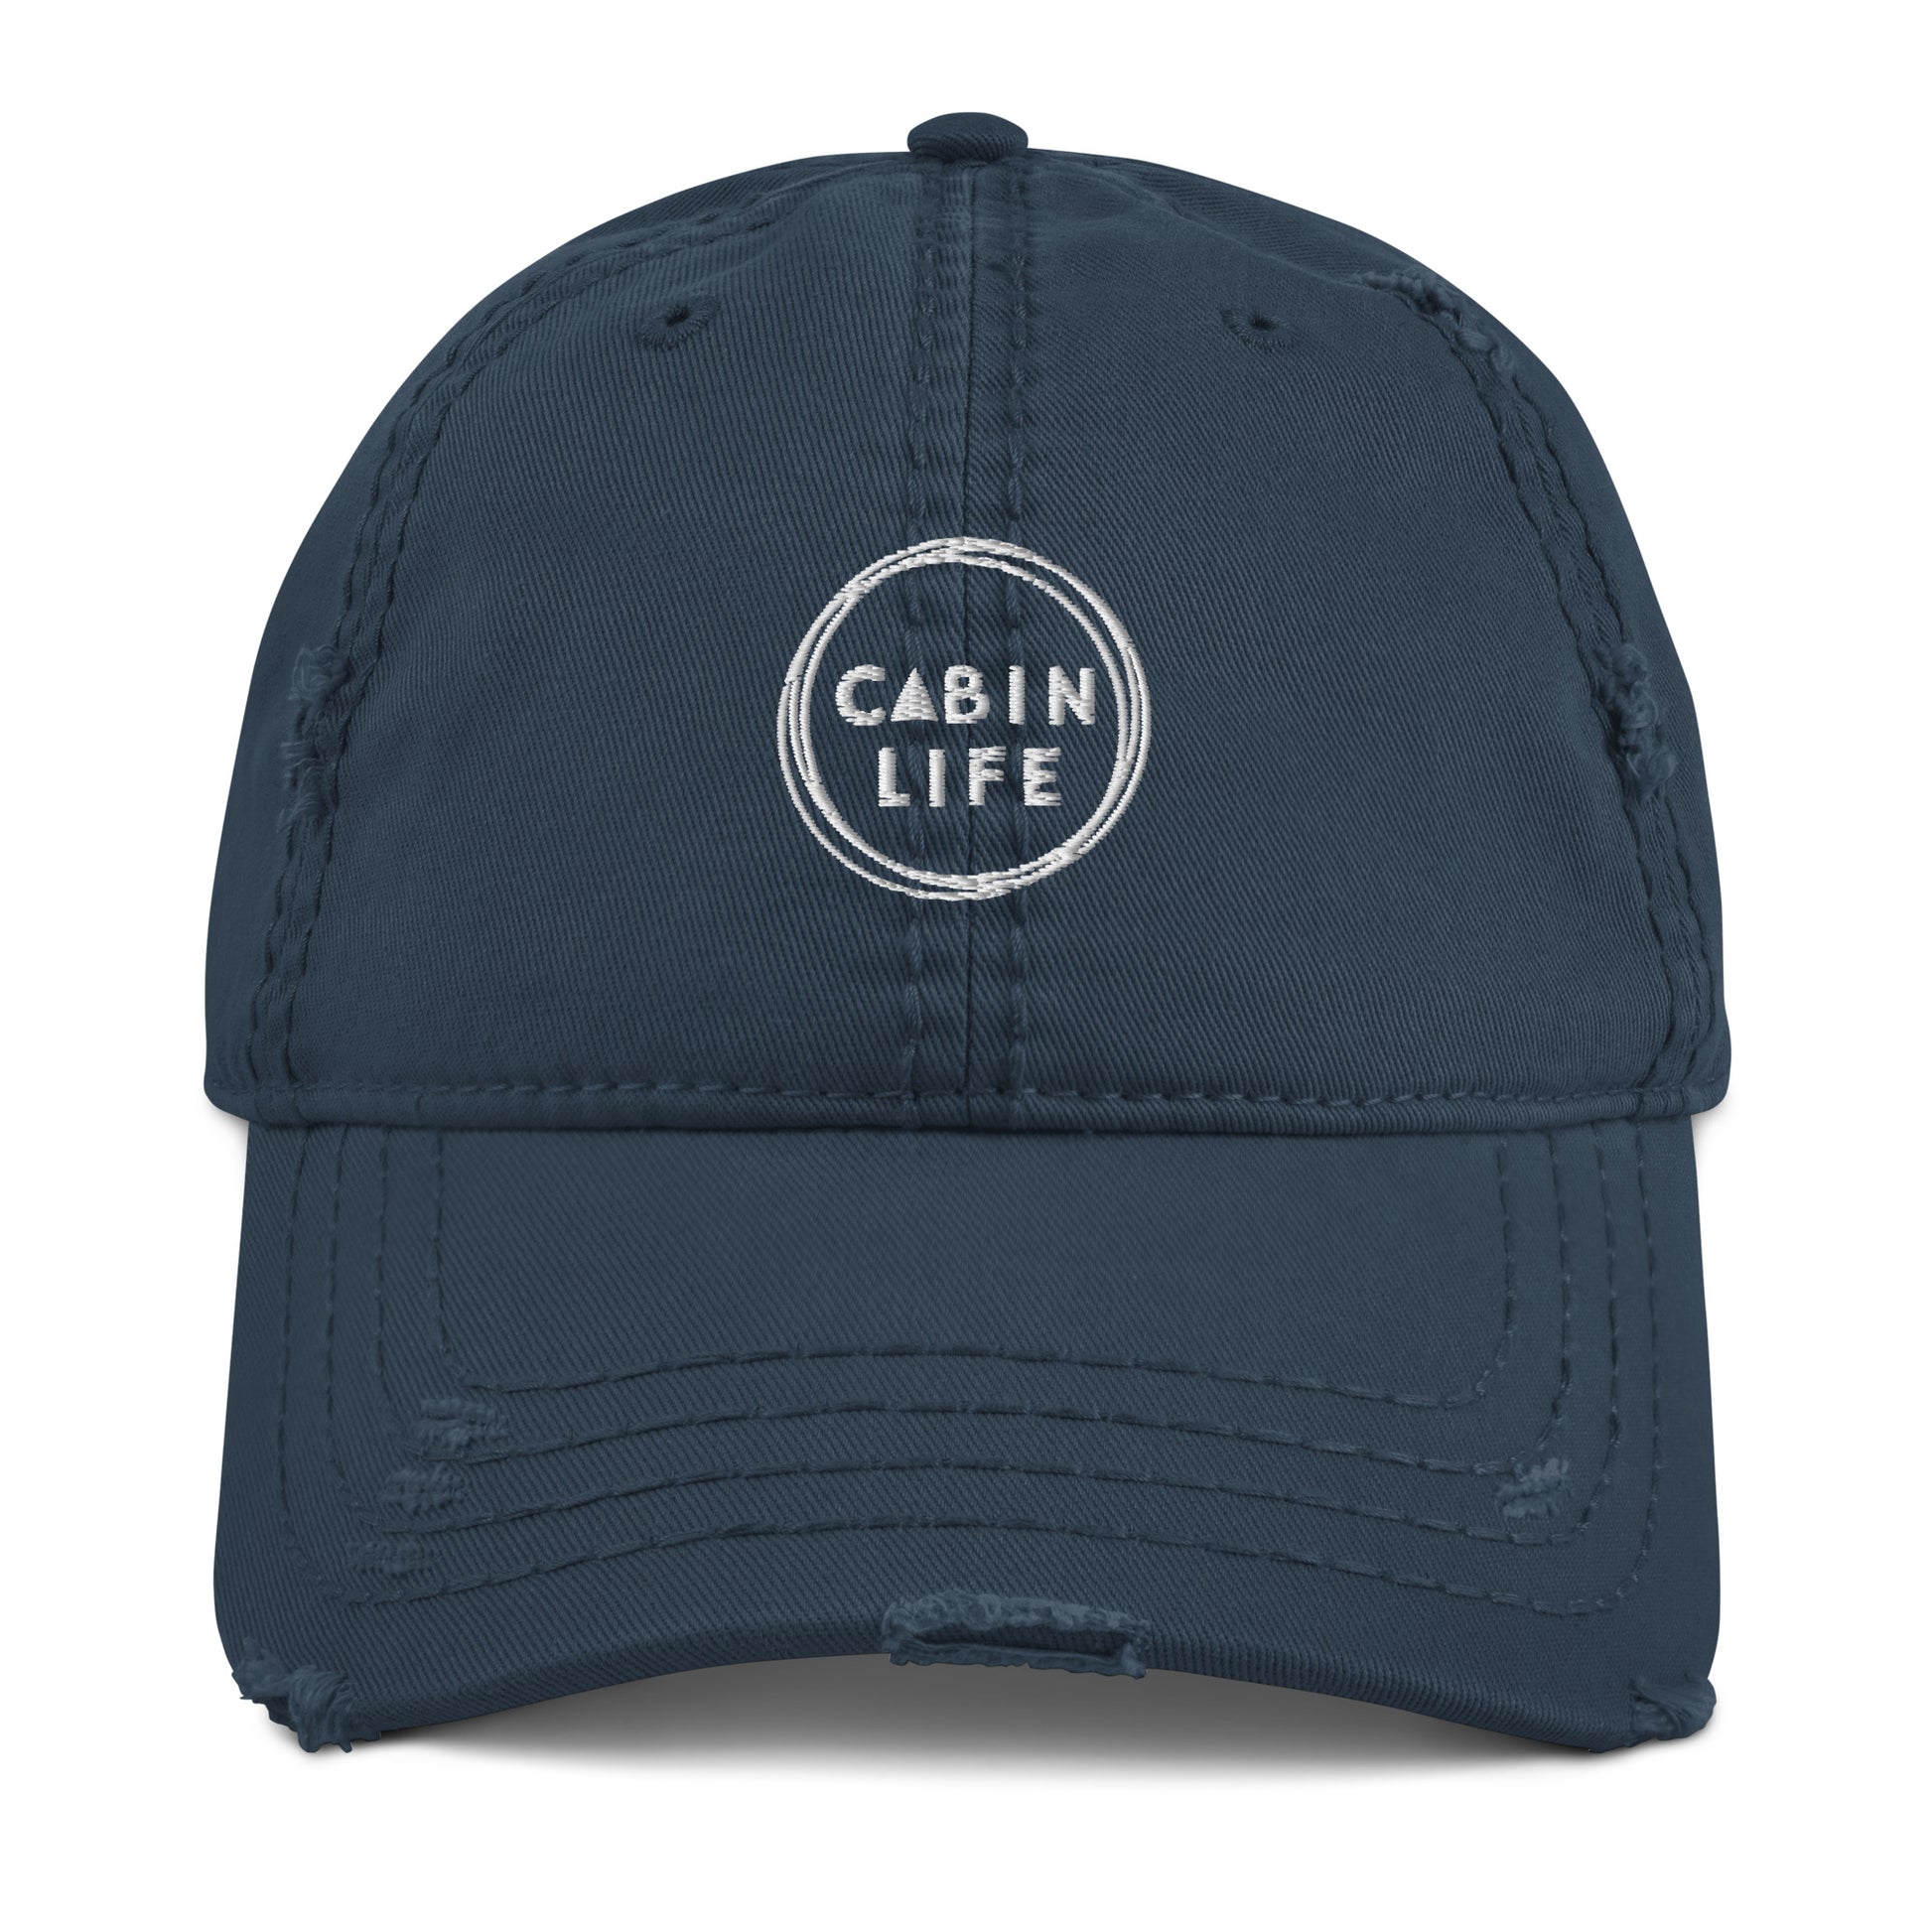 cabin life cap ballcap embroidery clothing aframe a-frame woods forest wear circle graphic comfy bella canvas vacation diy project